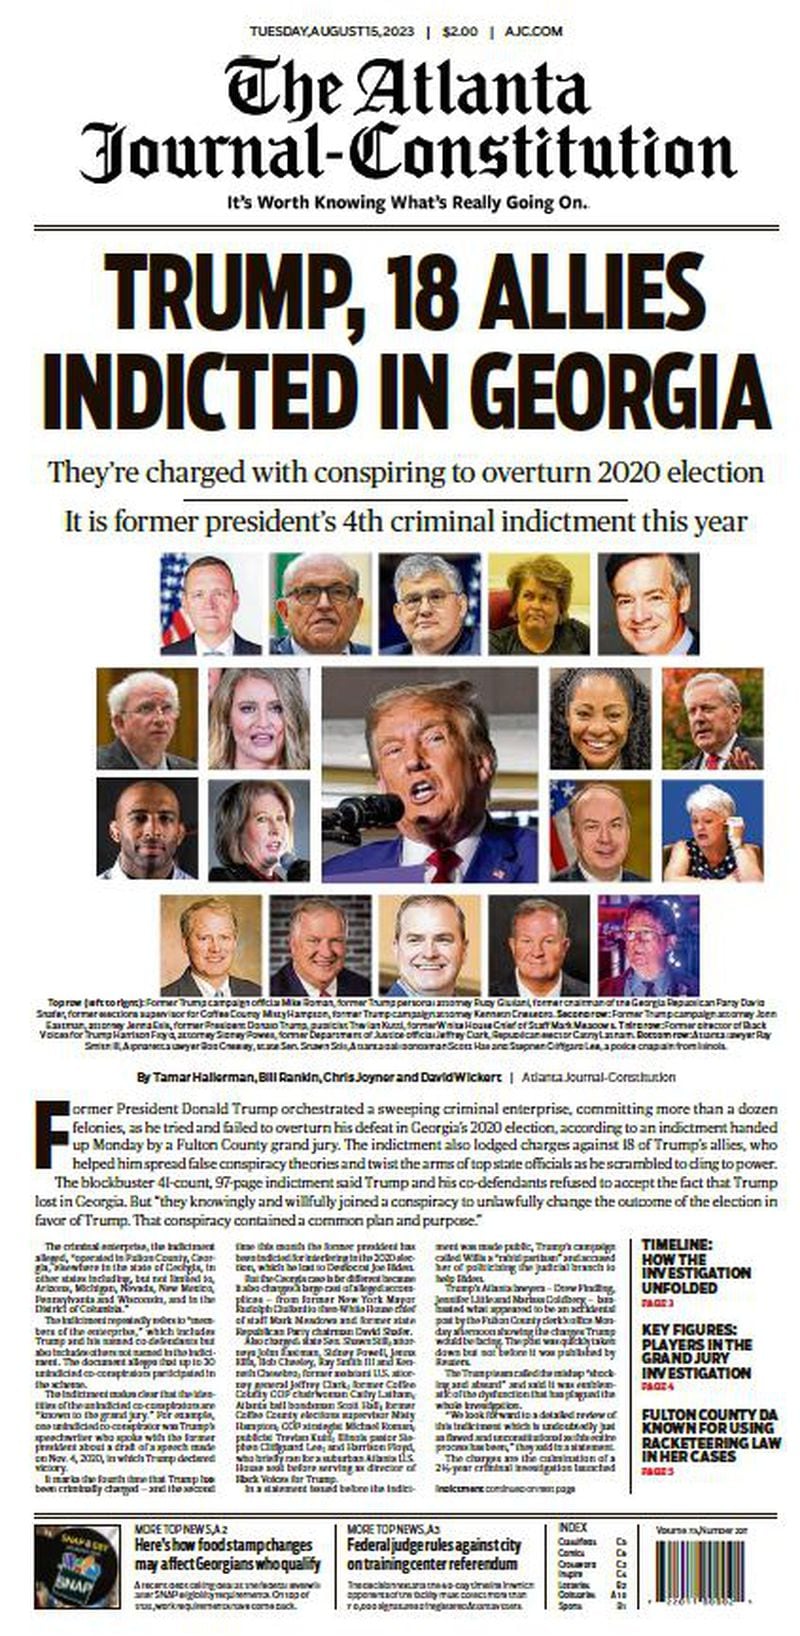 The front page of The Atlanta Journal-Constitution on August 15, 2023, featured a collage of all 19 defendants facing racketeering and other charges in Fulton County including former President Donald Trump.